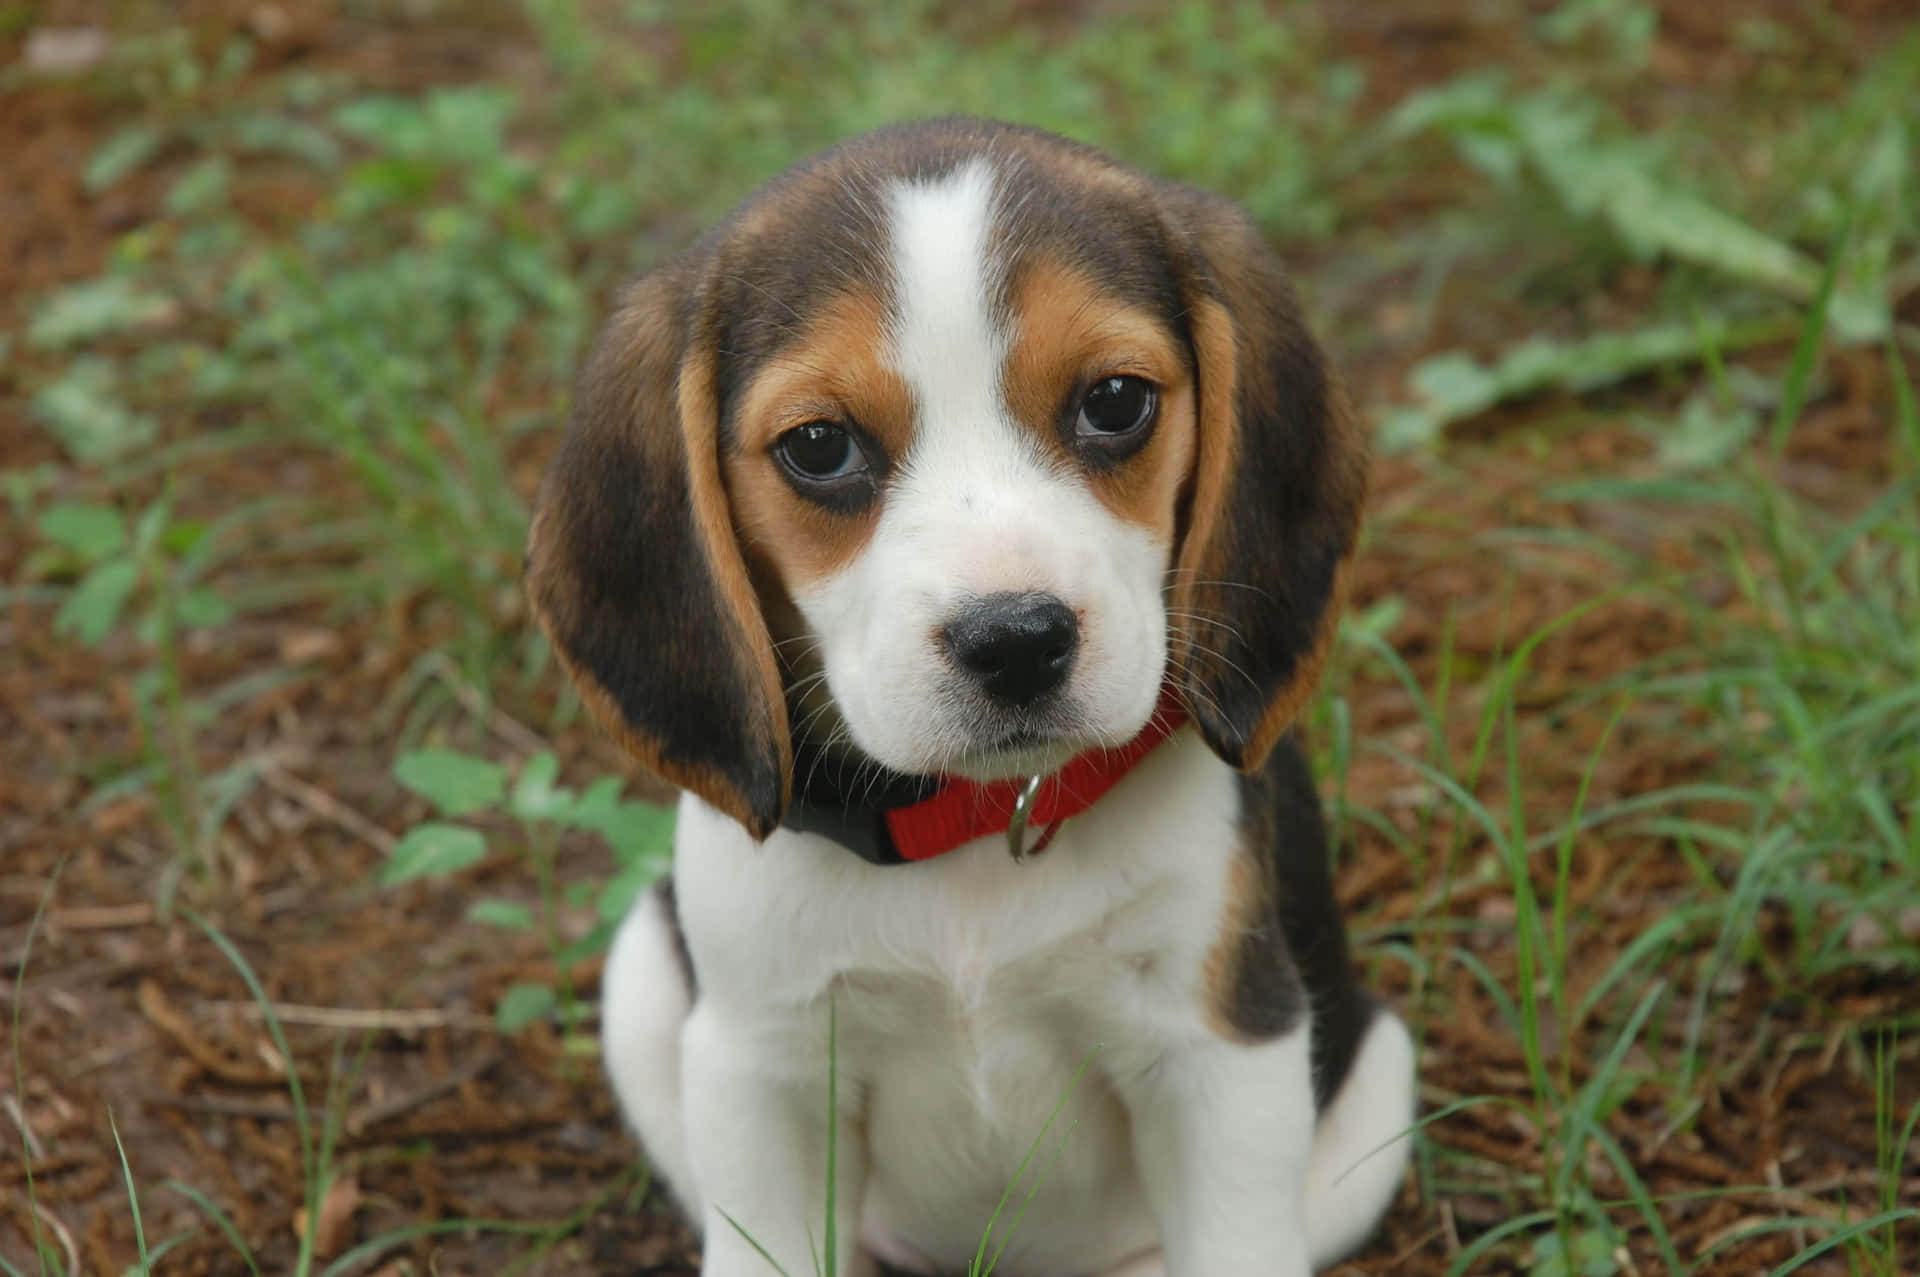 A happy Beagle pup lounging in the grass